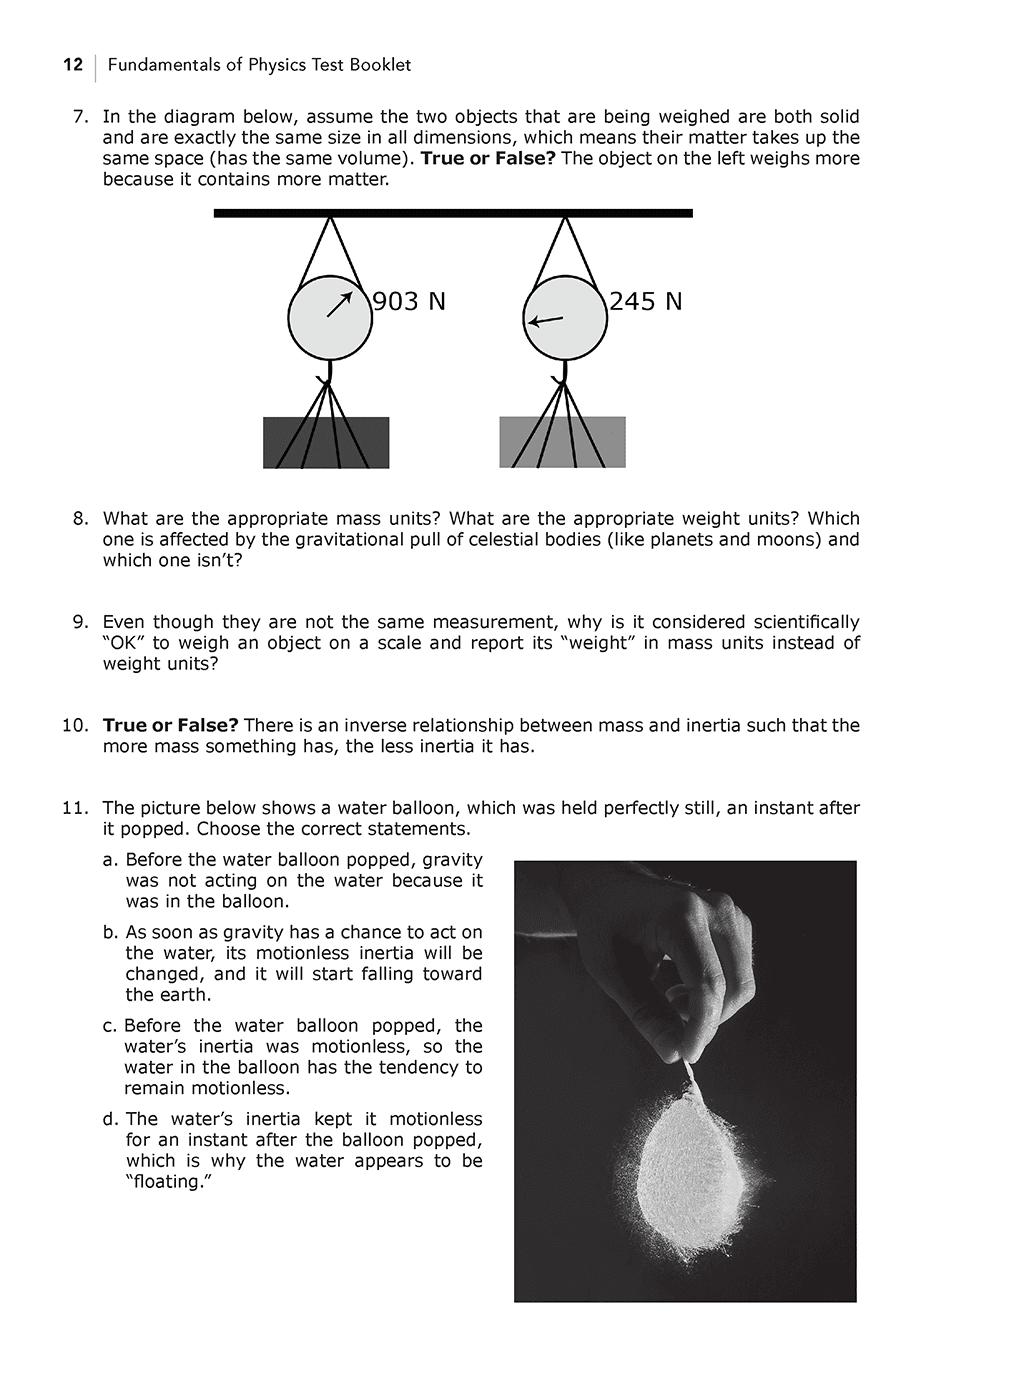 Test Booklet sample page 2 for Science Shepherd's biblical worldview physics curriculum